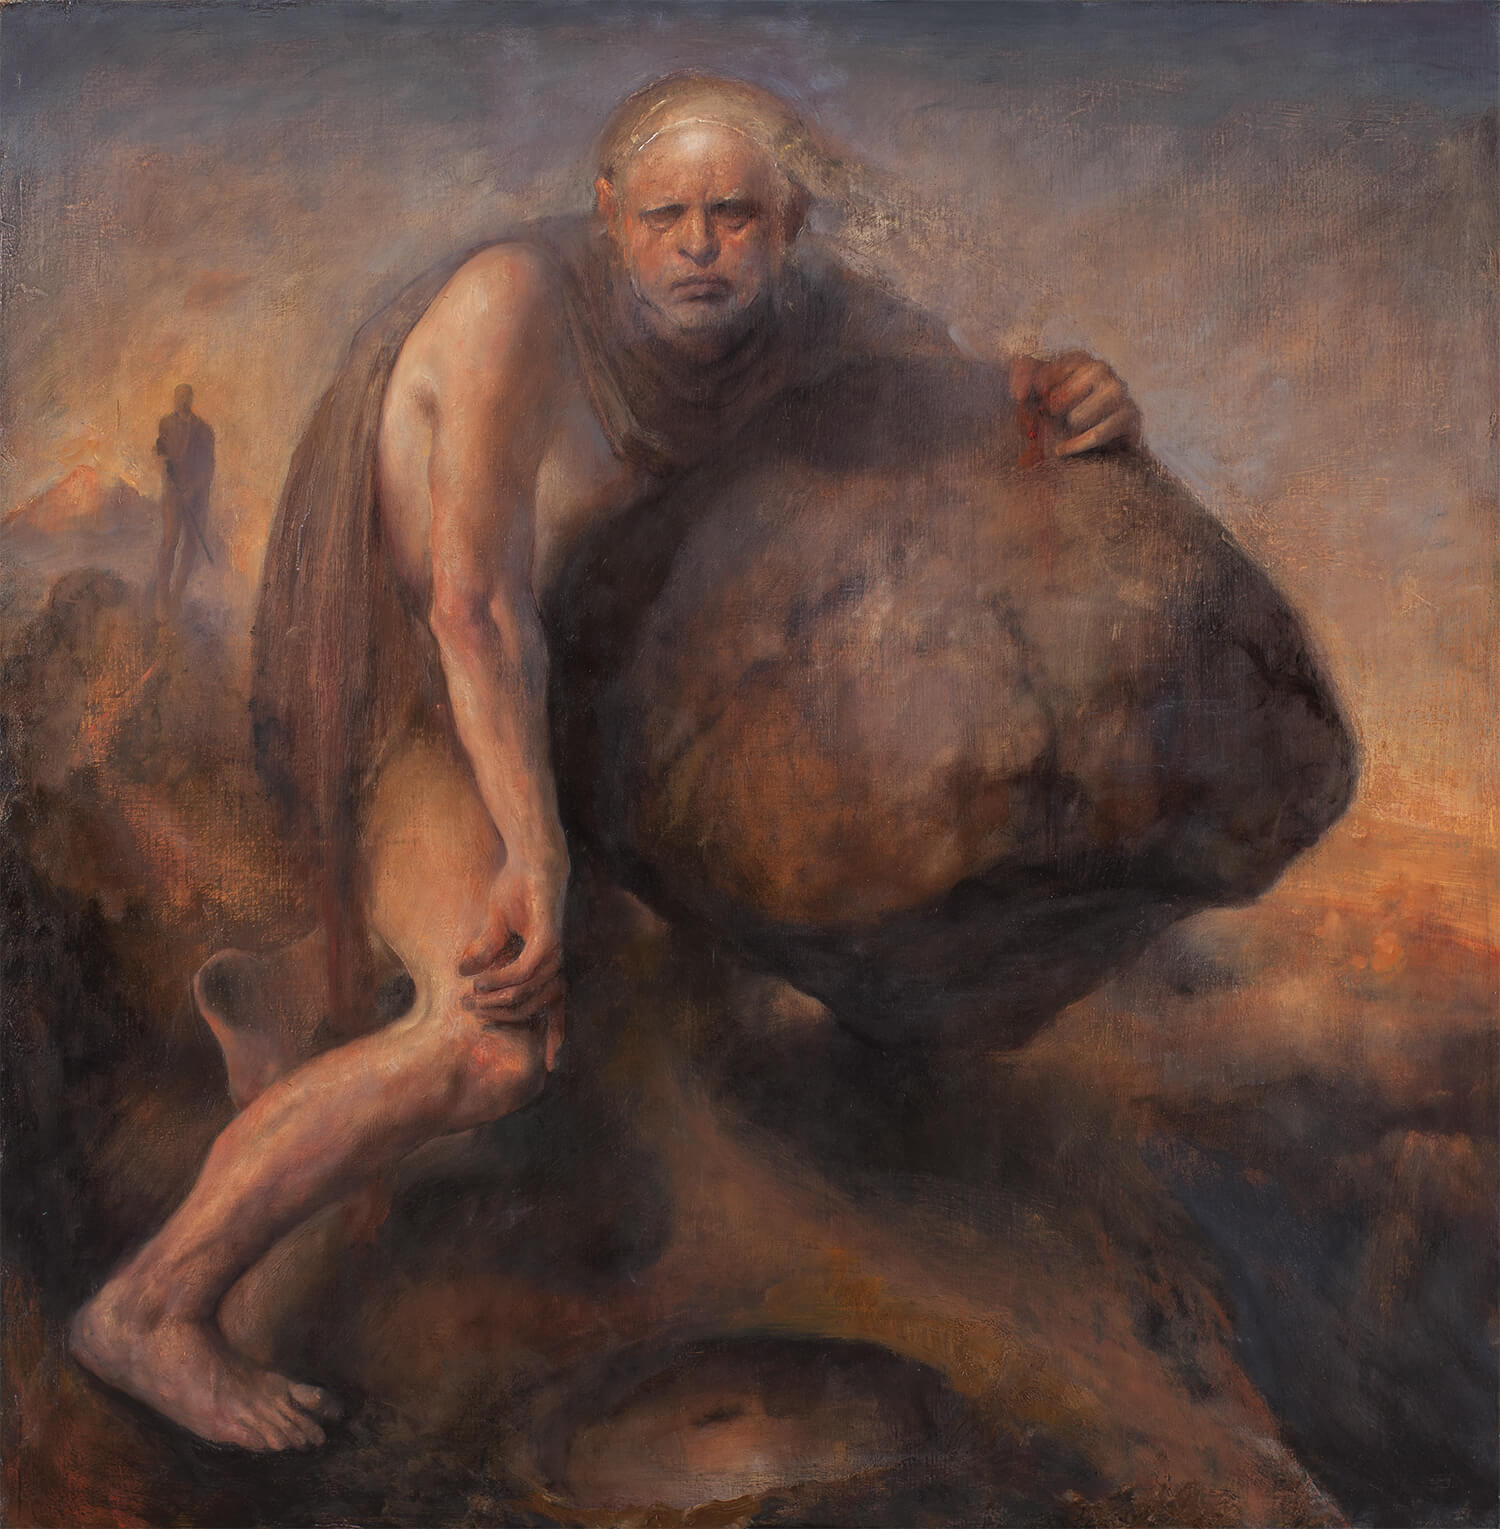 Man with Rock